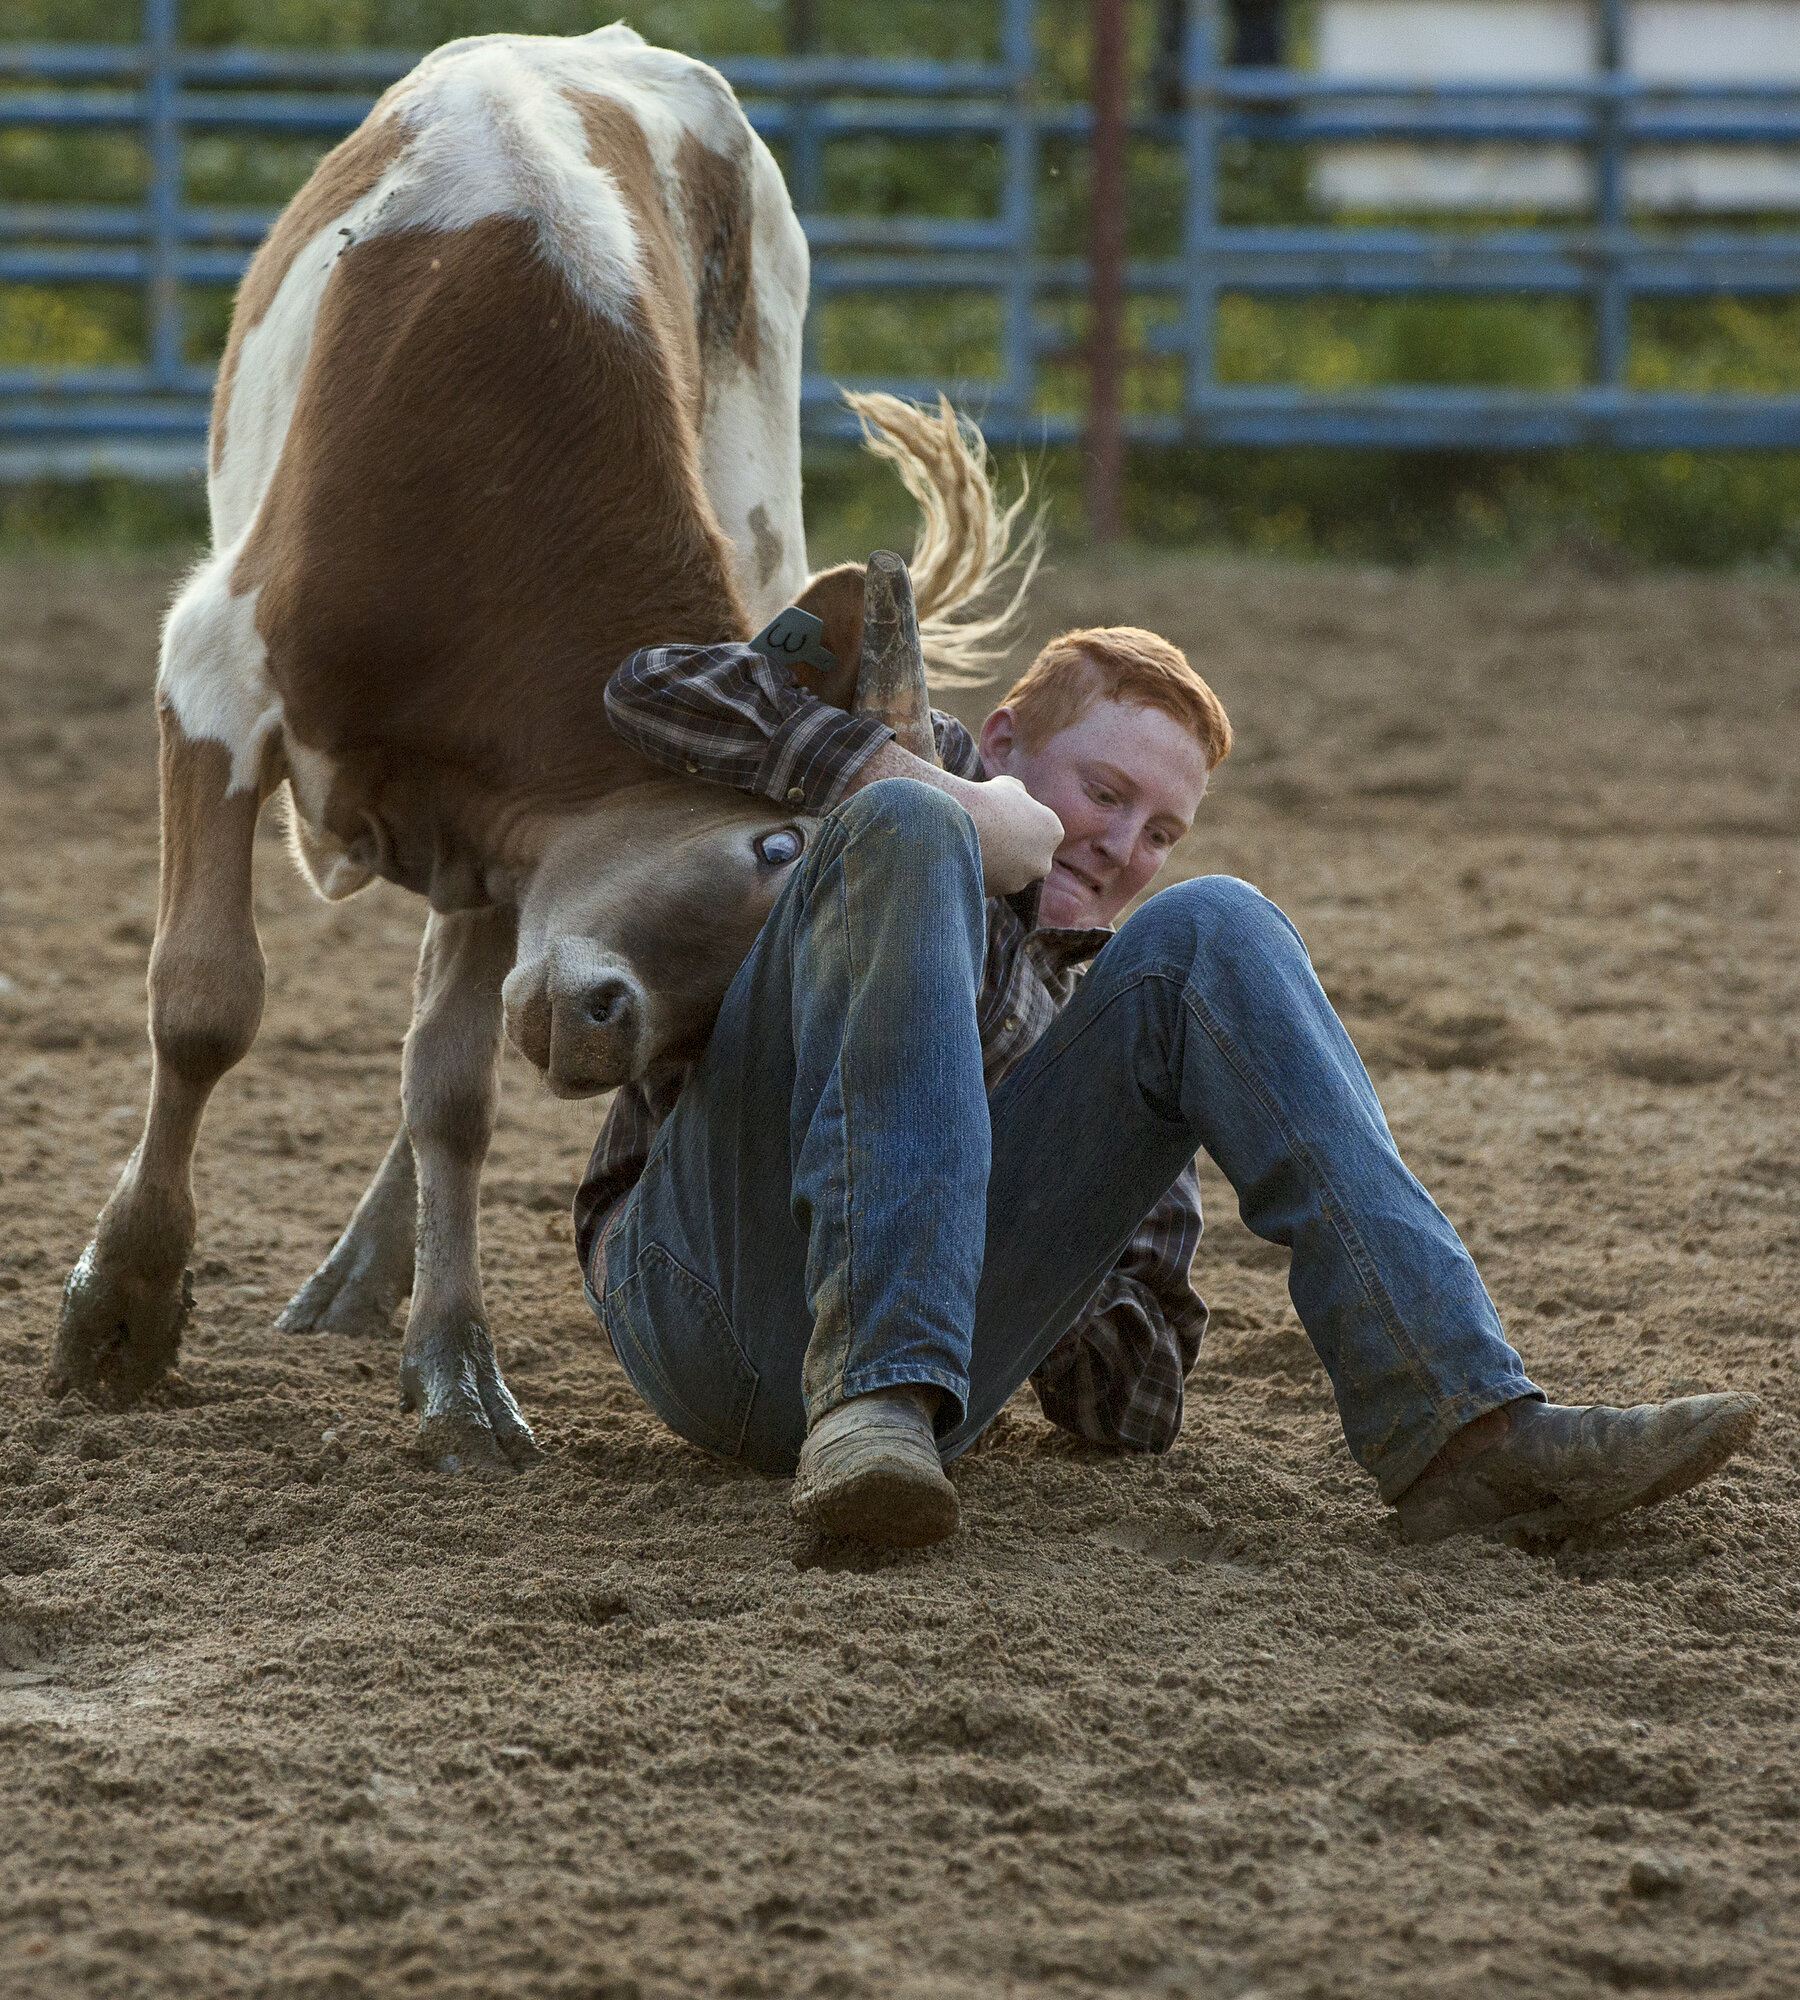  Clay Livengood of Cleveland wrestles a steer during the junior high chute dogging event. Chute dogging is an event similar to steer wrestling.  